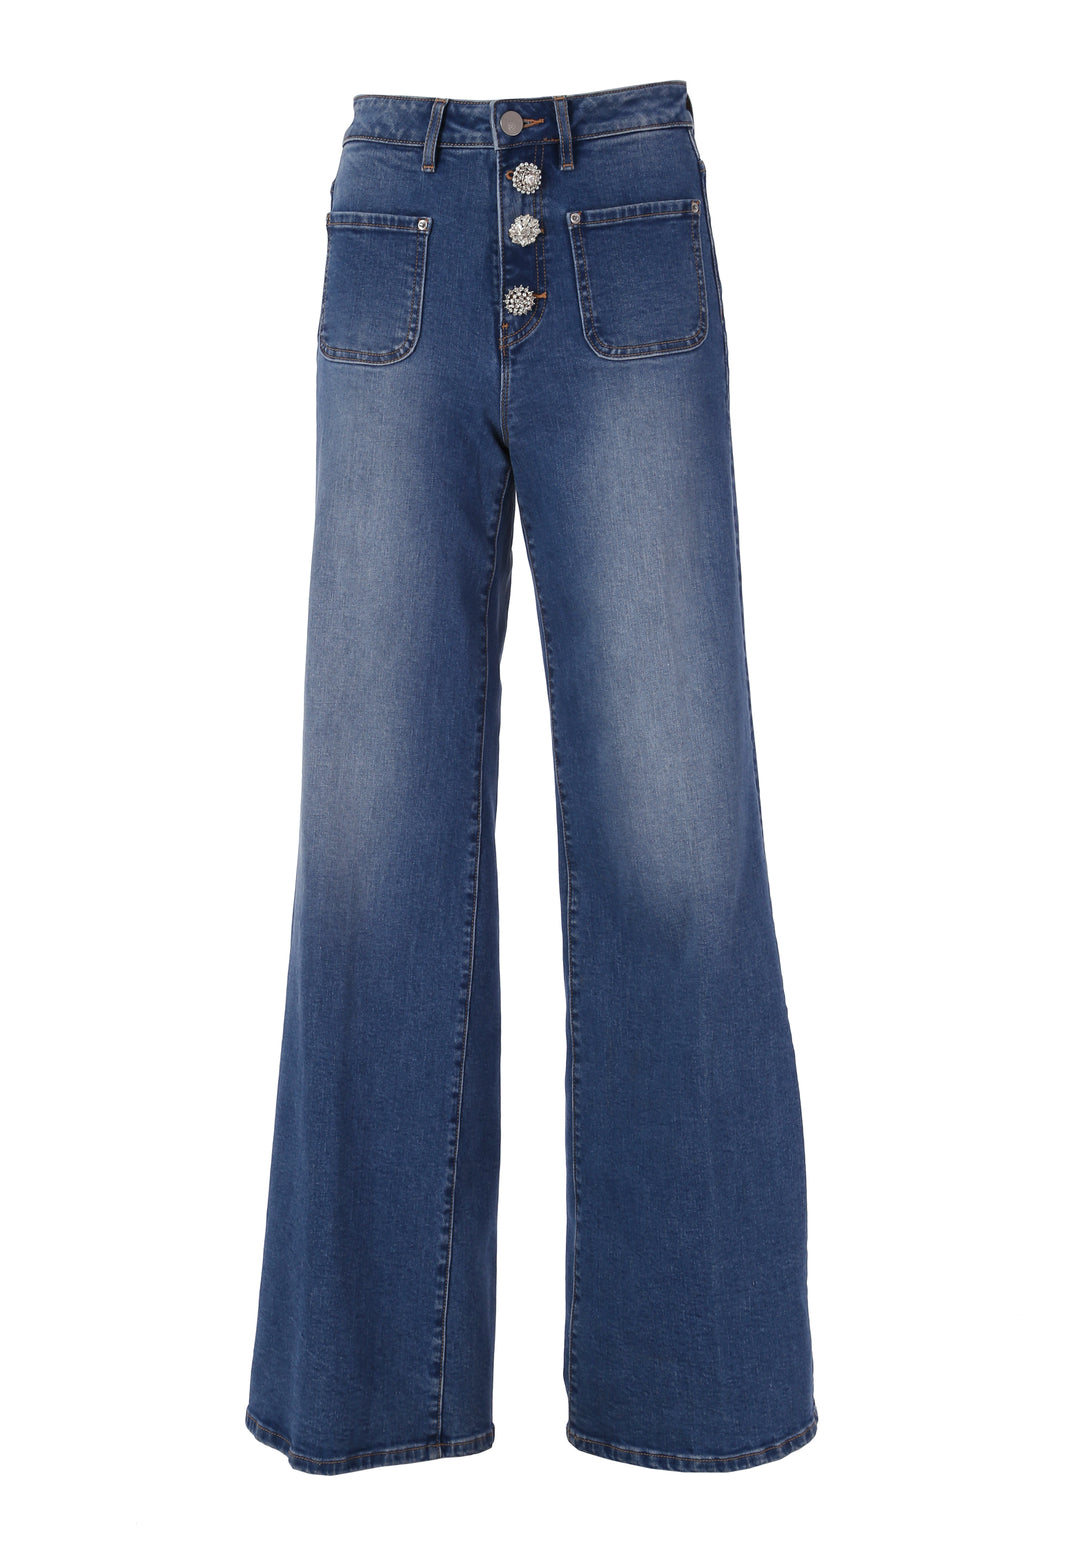 Jeans flare made in denim with middle wash